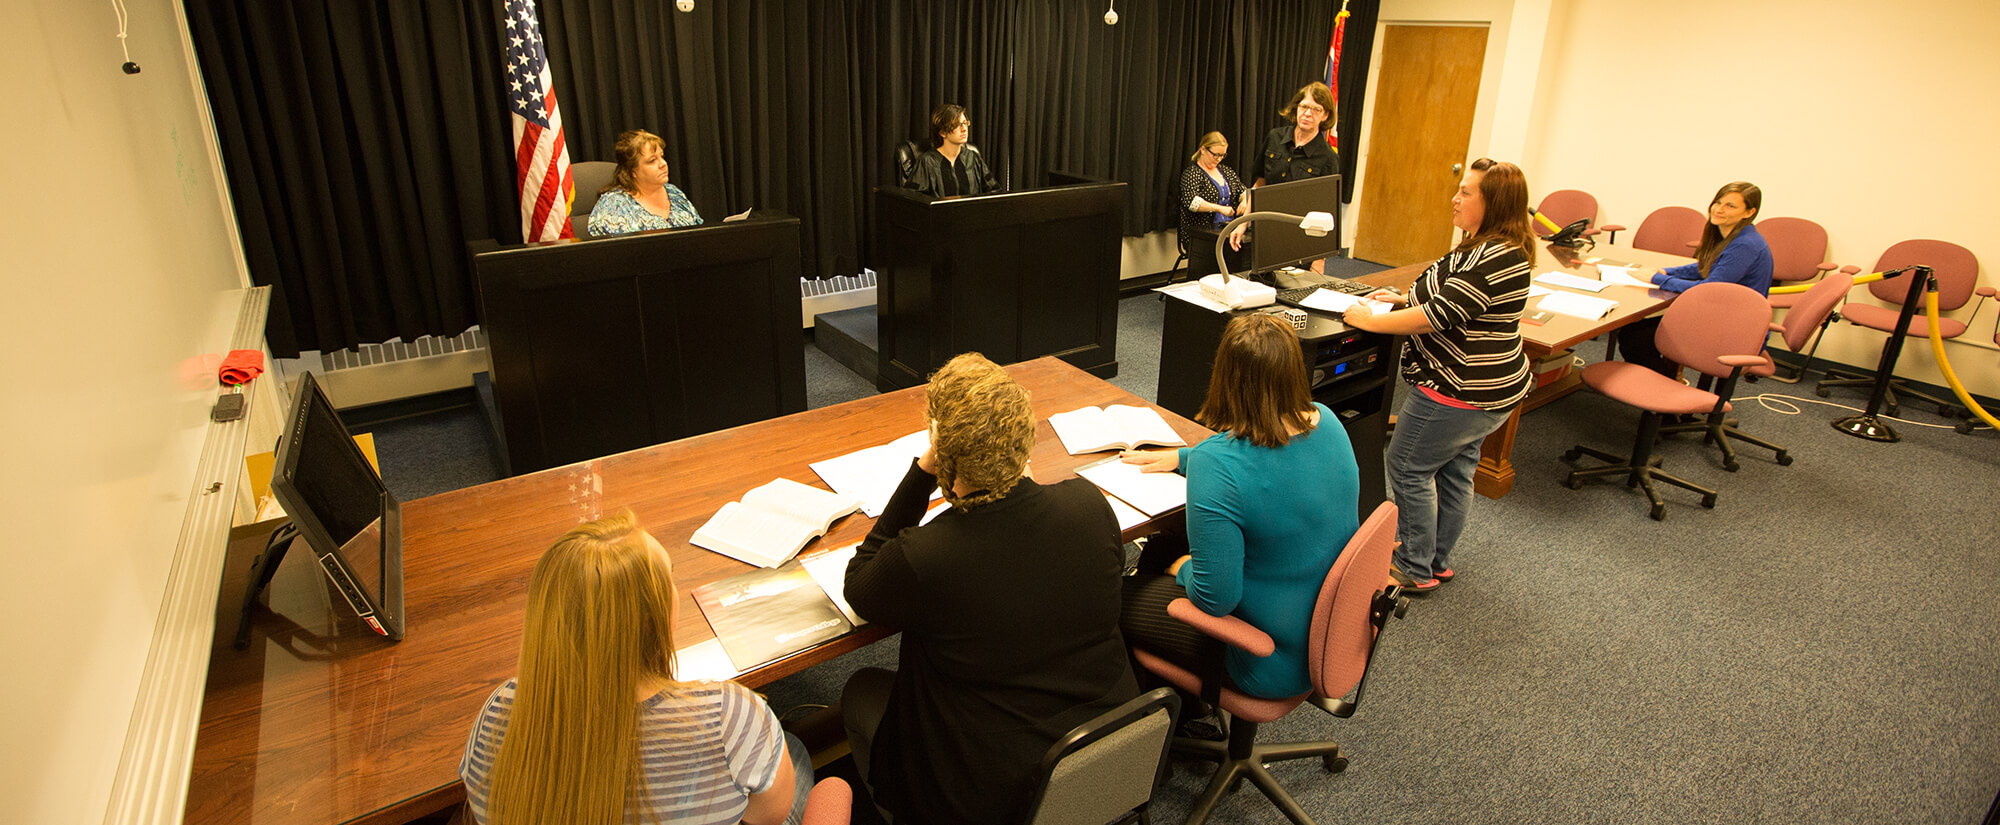 Students act out a courtroom scene as part of the paralegal program.